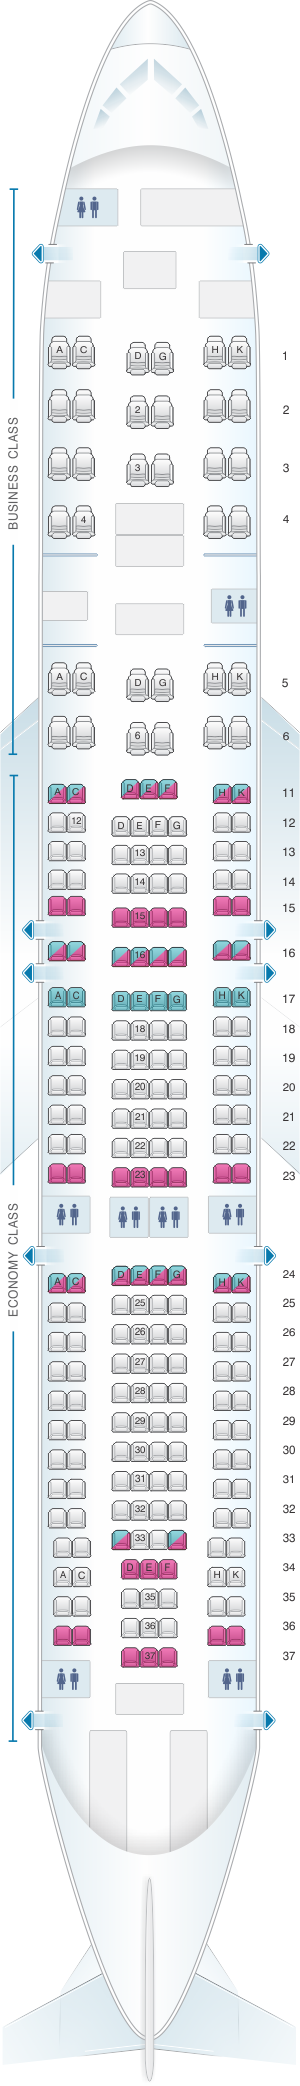 Seat Map Aeroflot Russian Airlines Airbus A330 200 Hawaiian Airlines